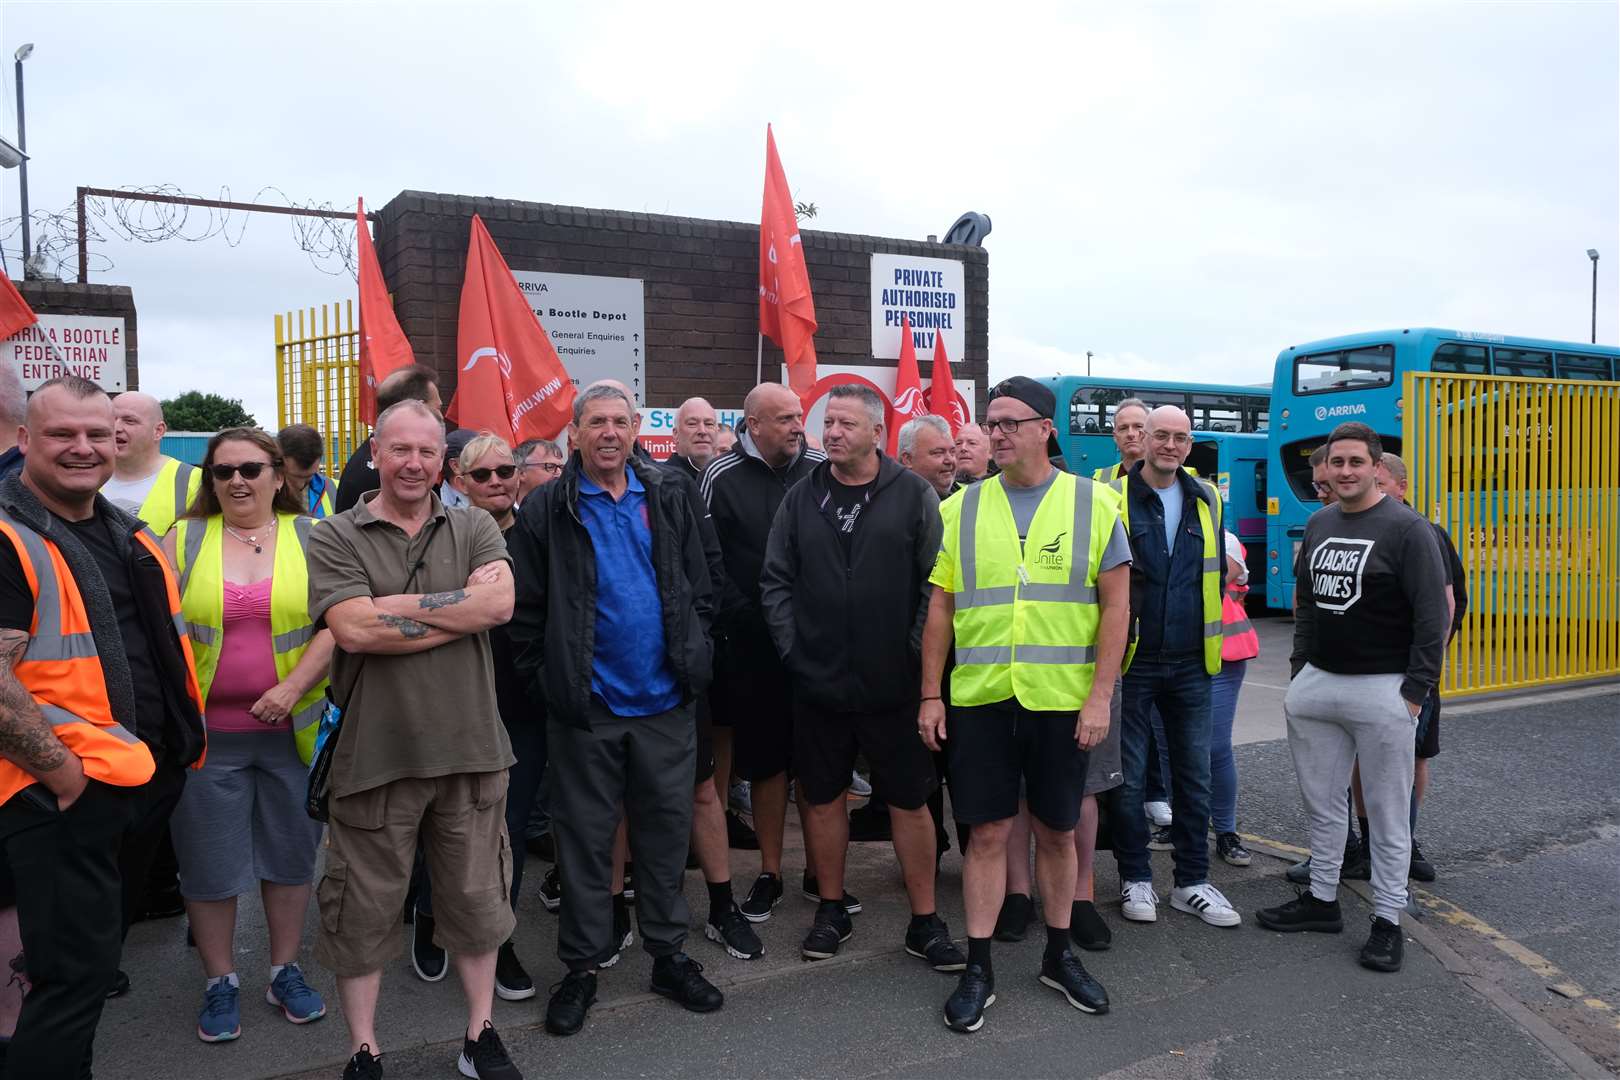 Picketing Arriva drivers during previous strike action